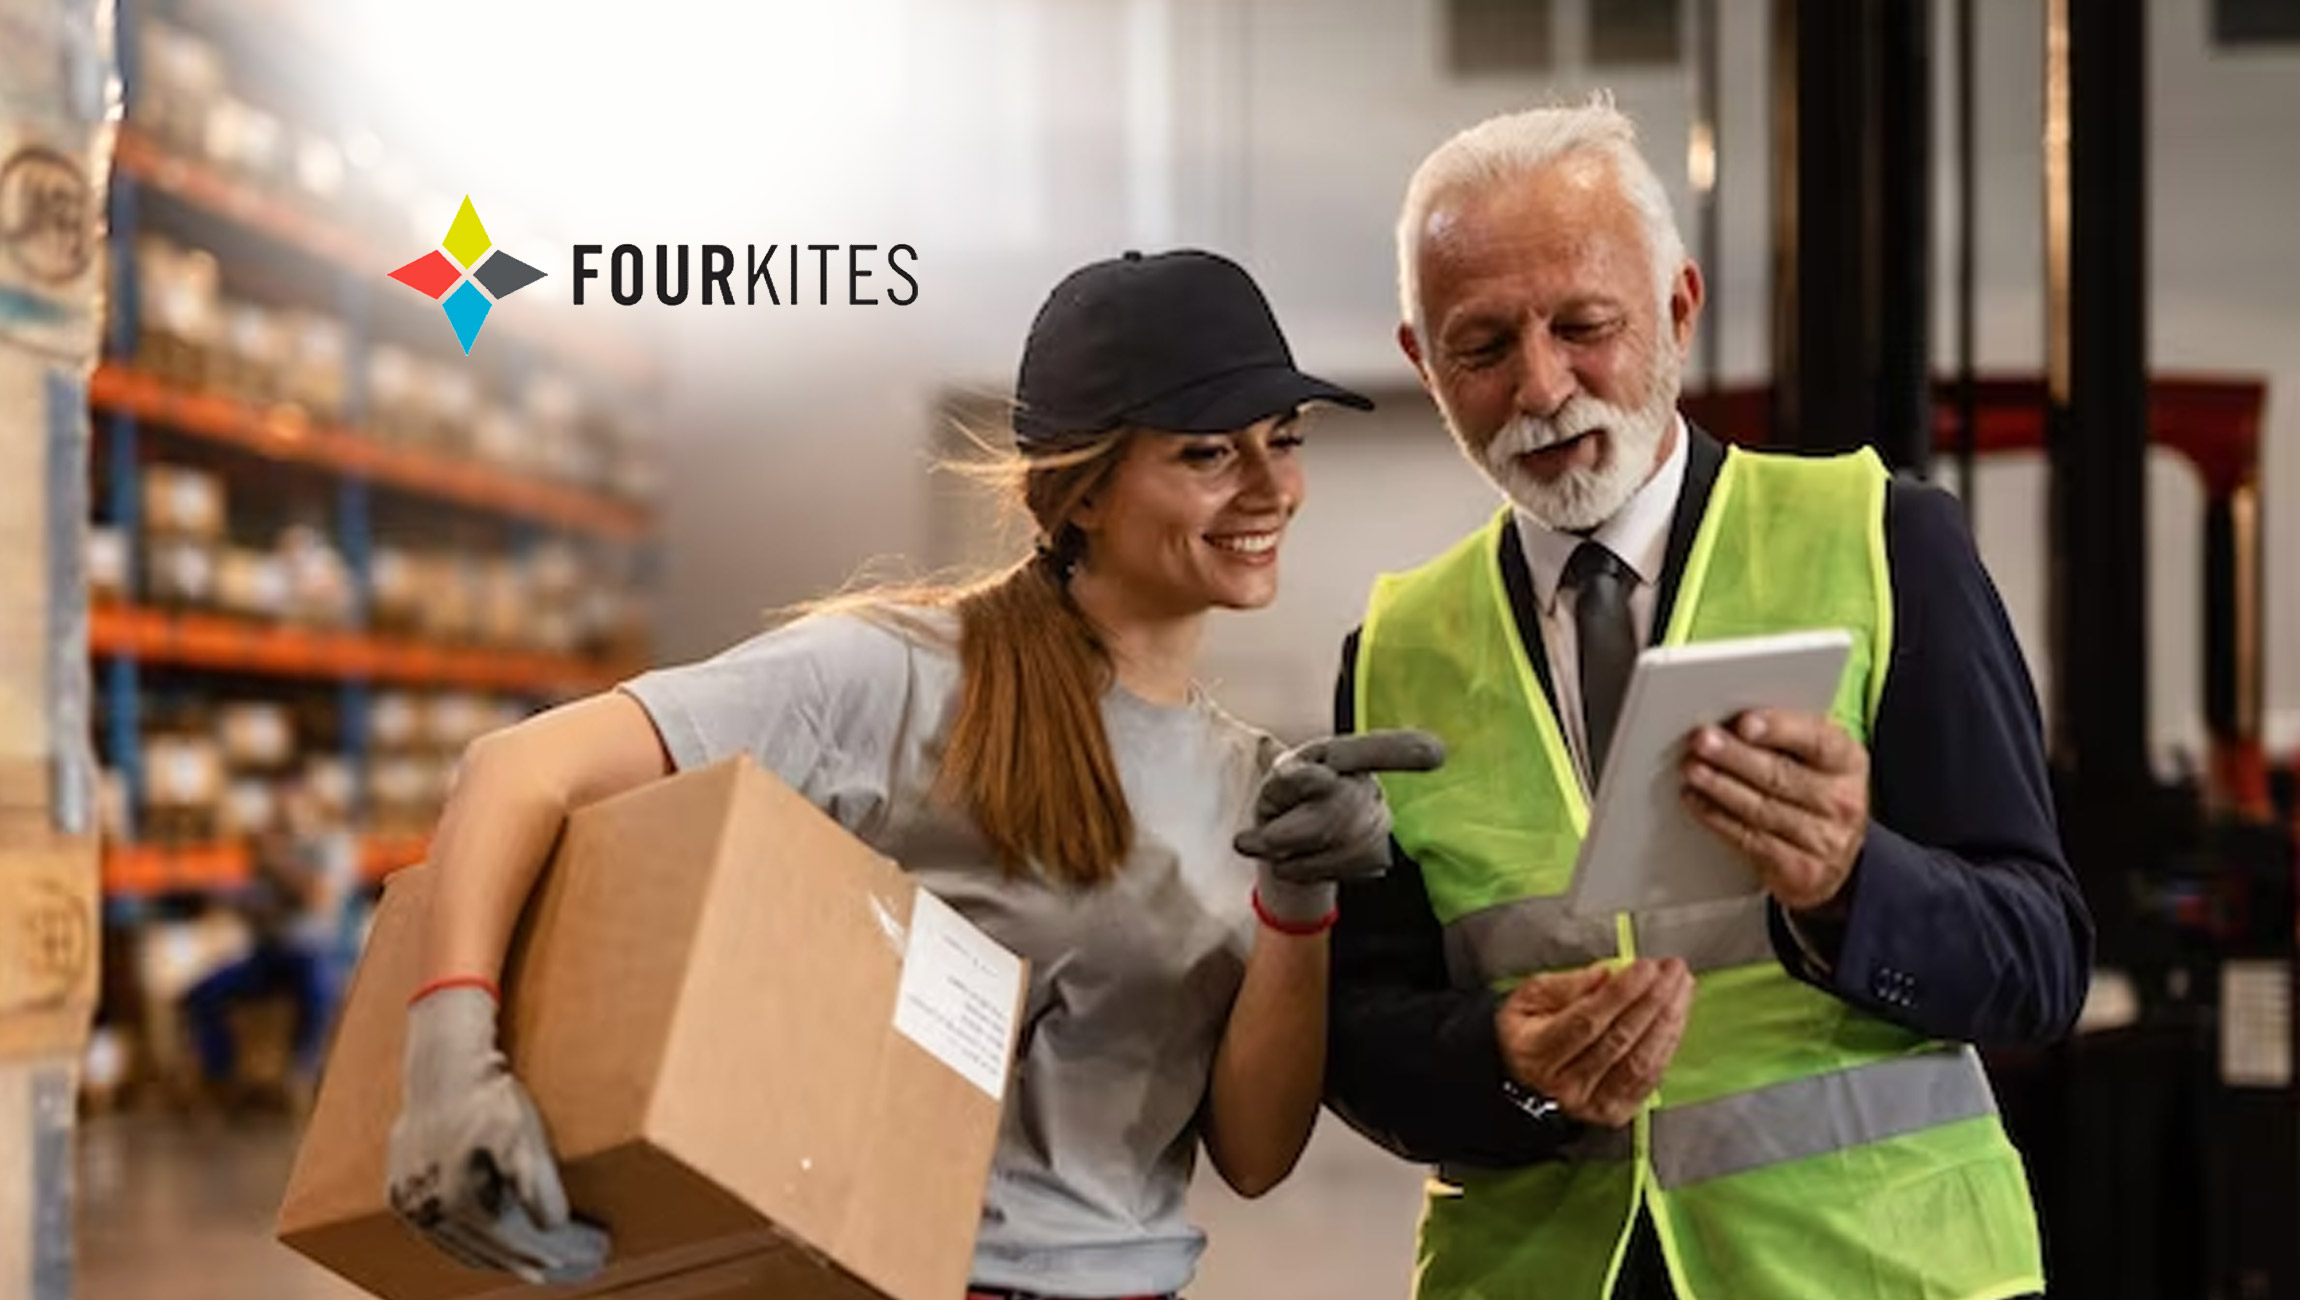 FourKites Launches Inbound Visibility Solution to Enhance End-to-End, Shipment- and Order-Level Insights Across Suppliers